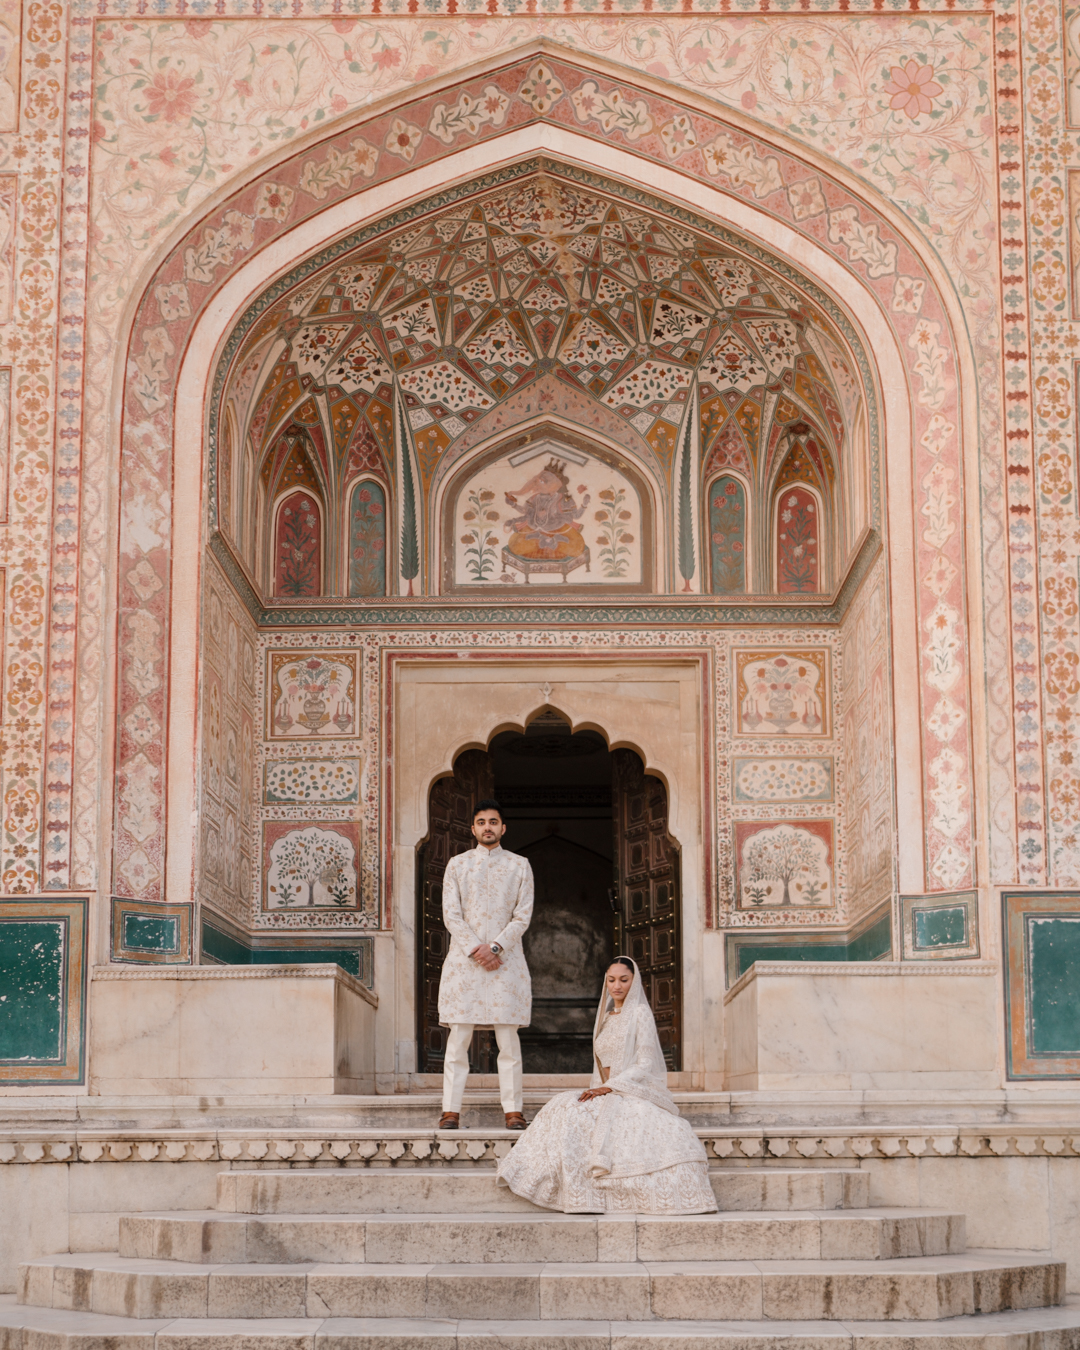 Bride and Groom in front of Amber Palace.